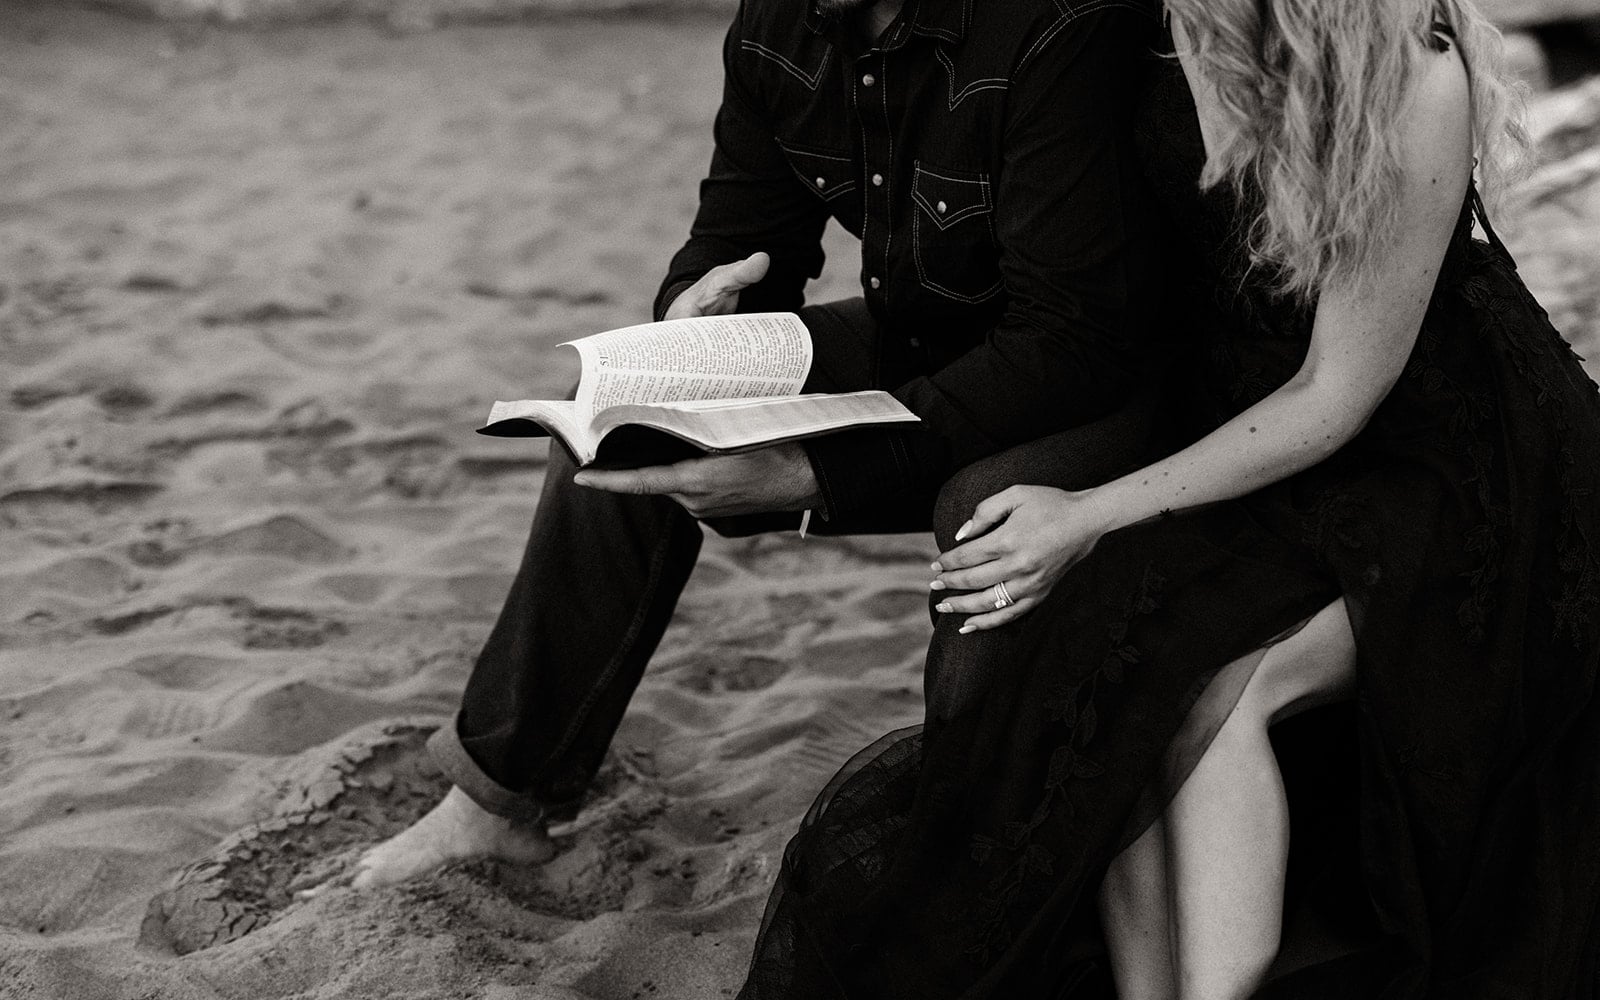 The couple reads the bible together.